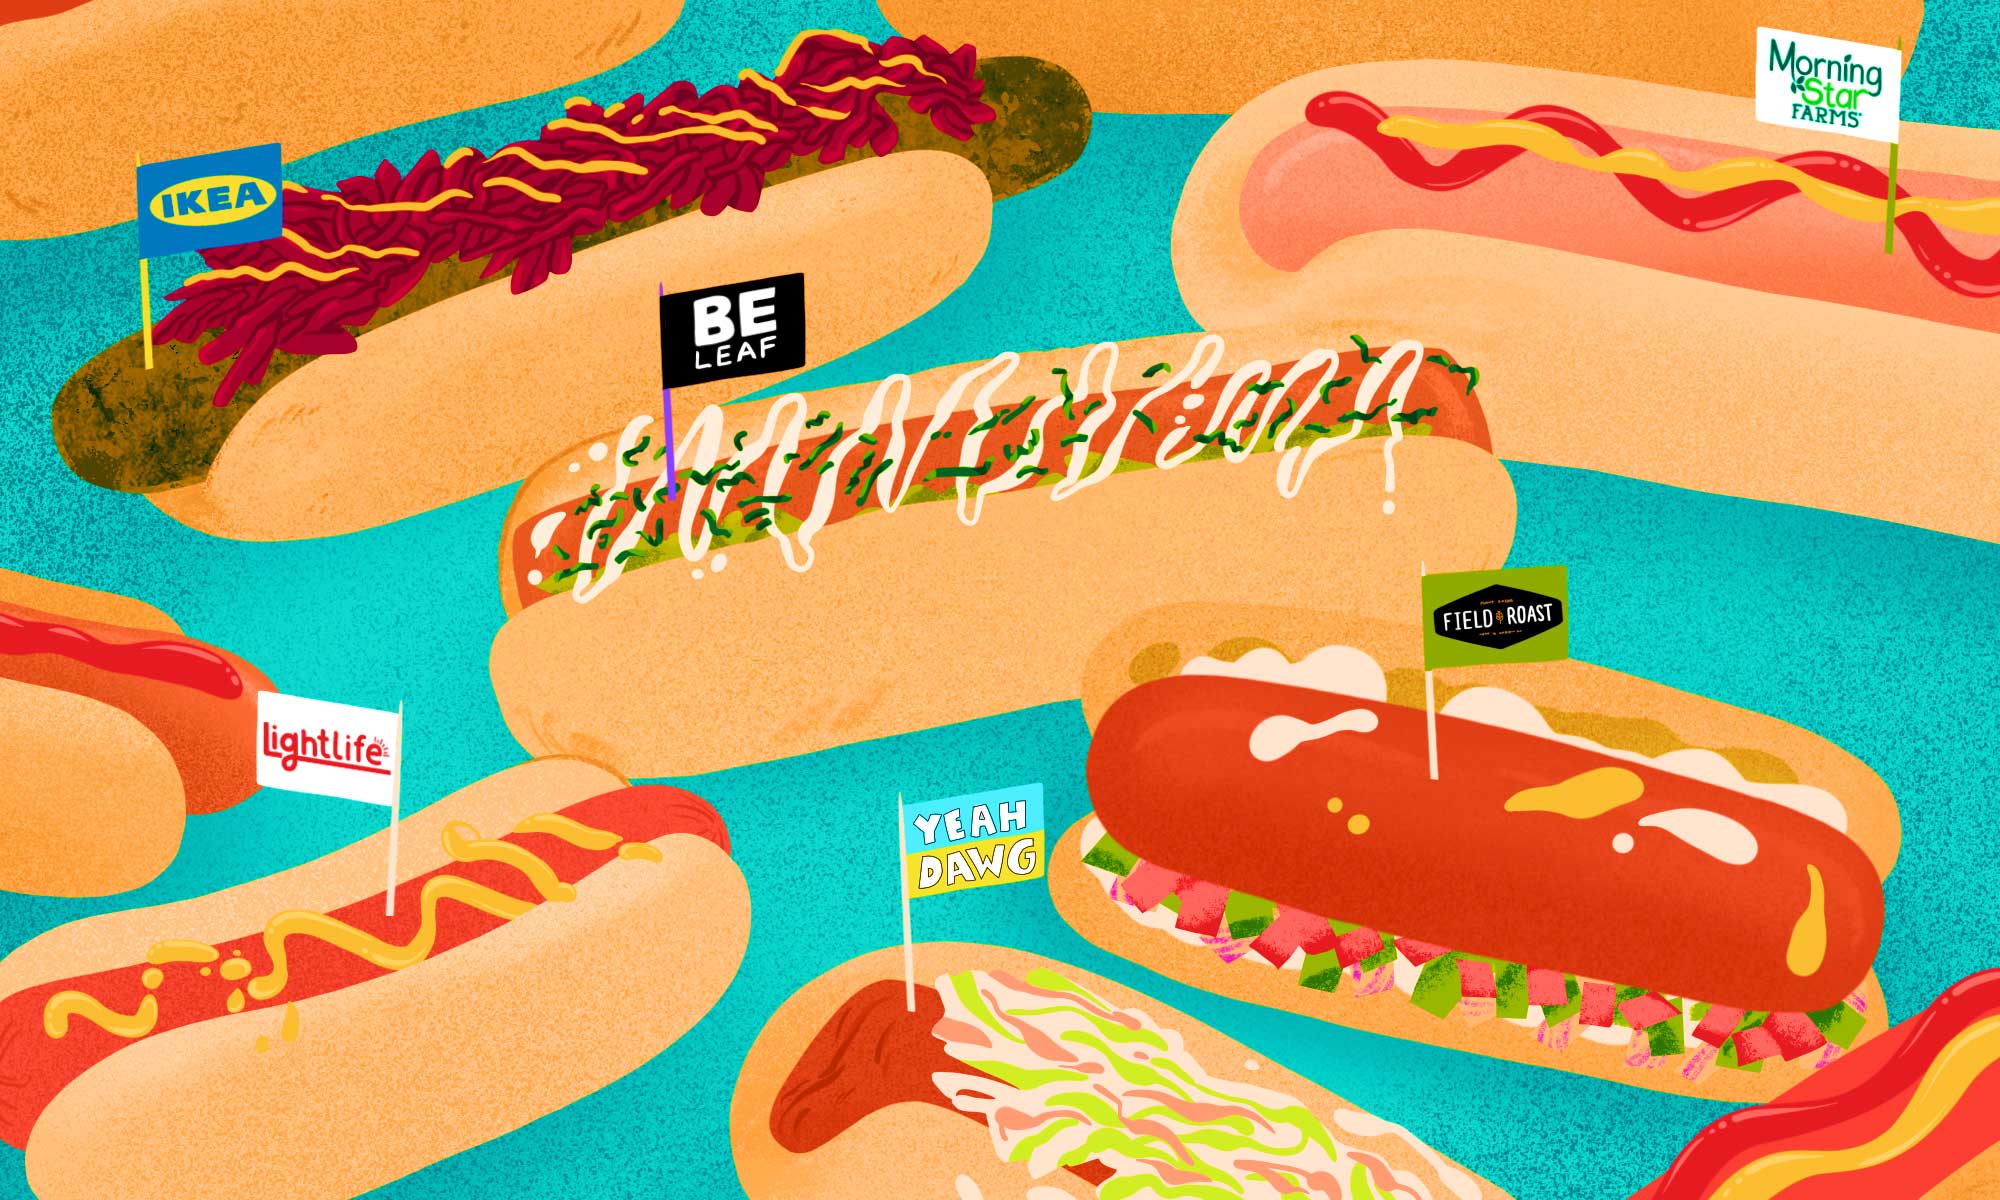 A group of veggie dogs in buns, each with a little flag that advertises the veggie dog brand. Illustration.